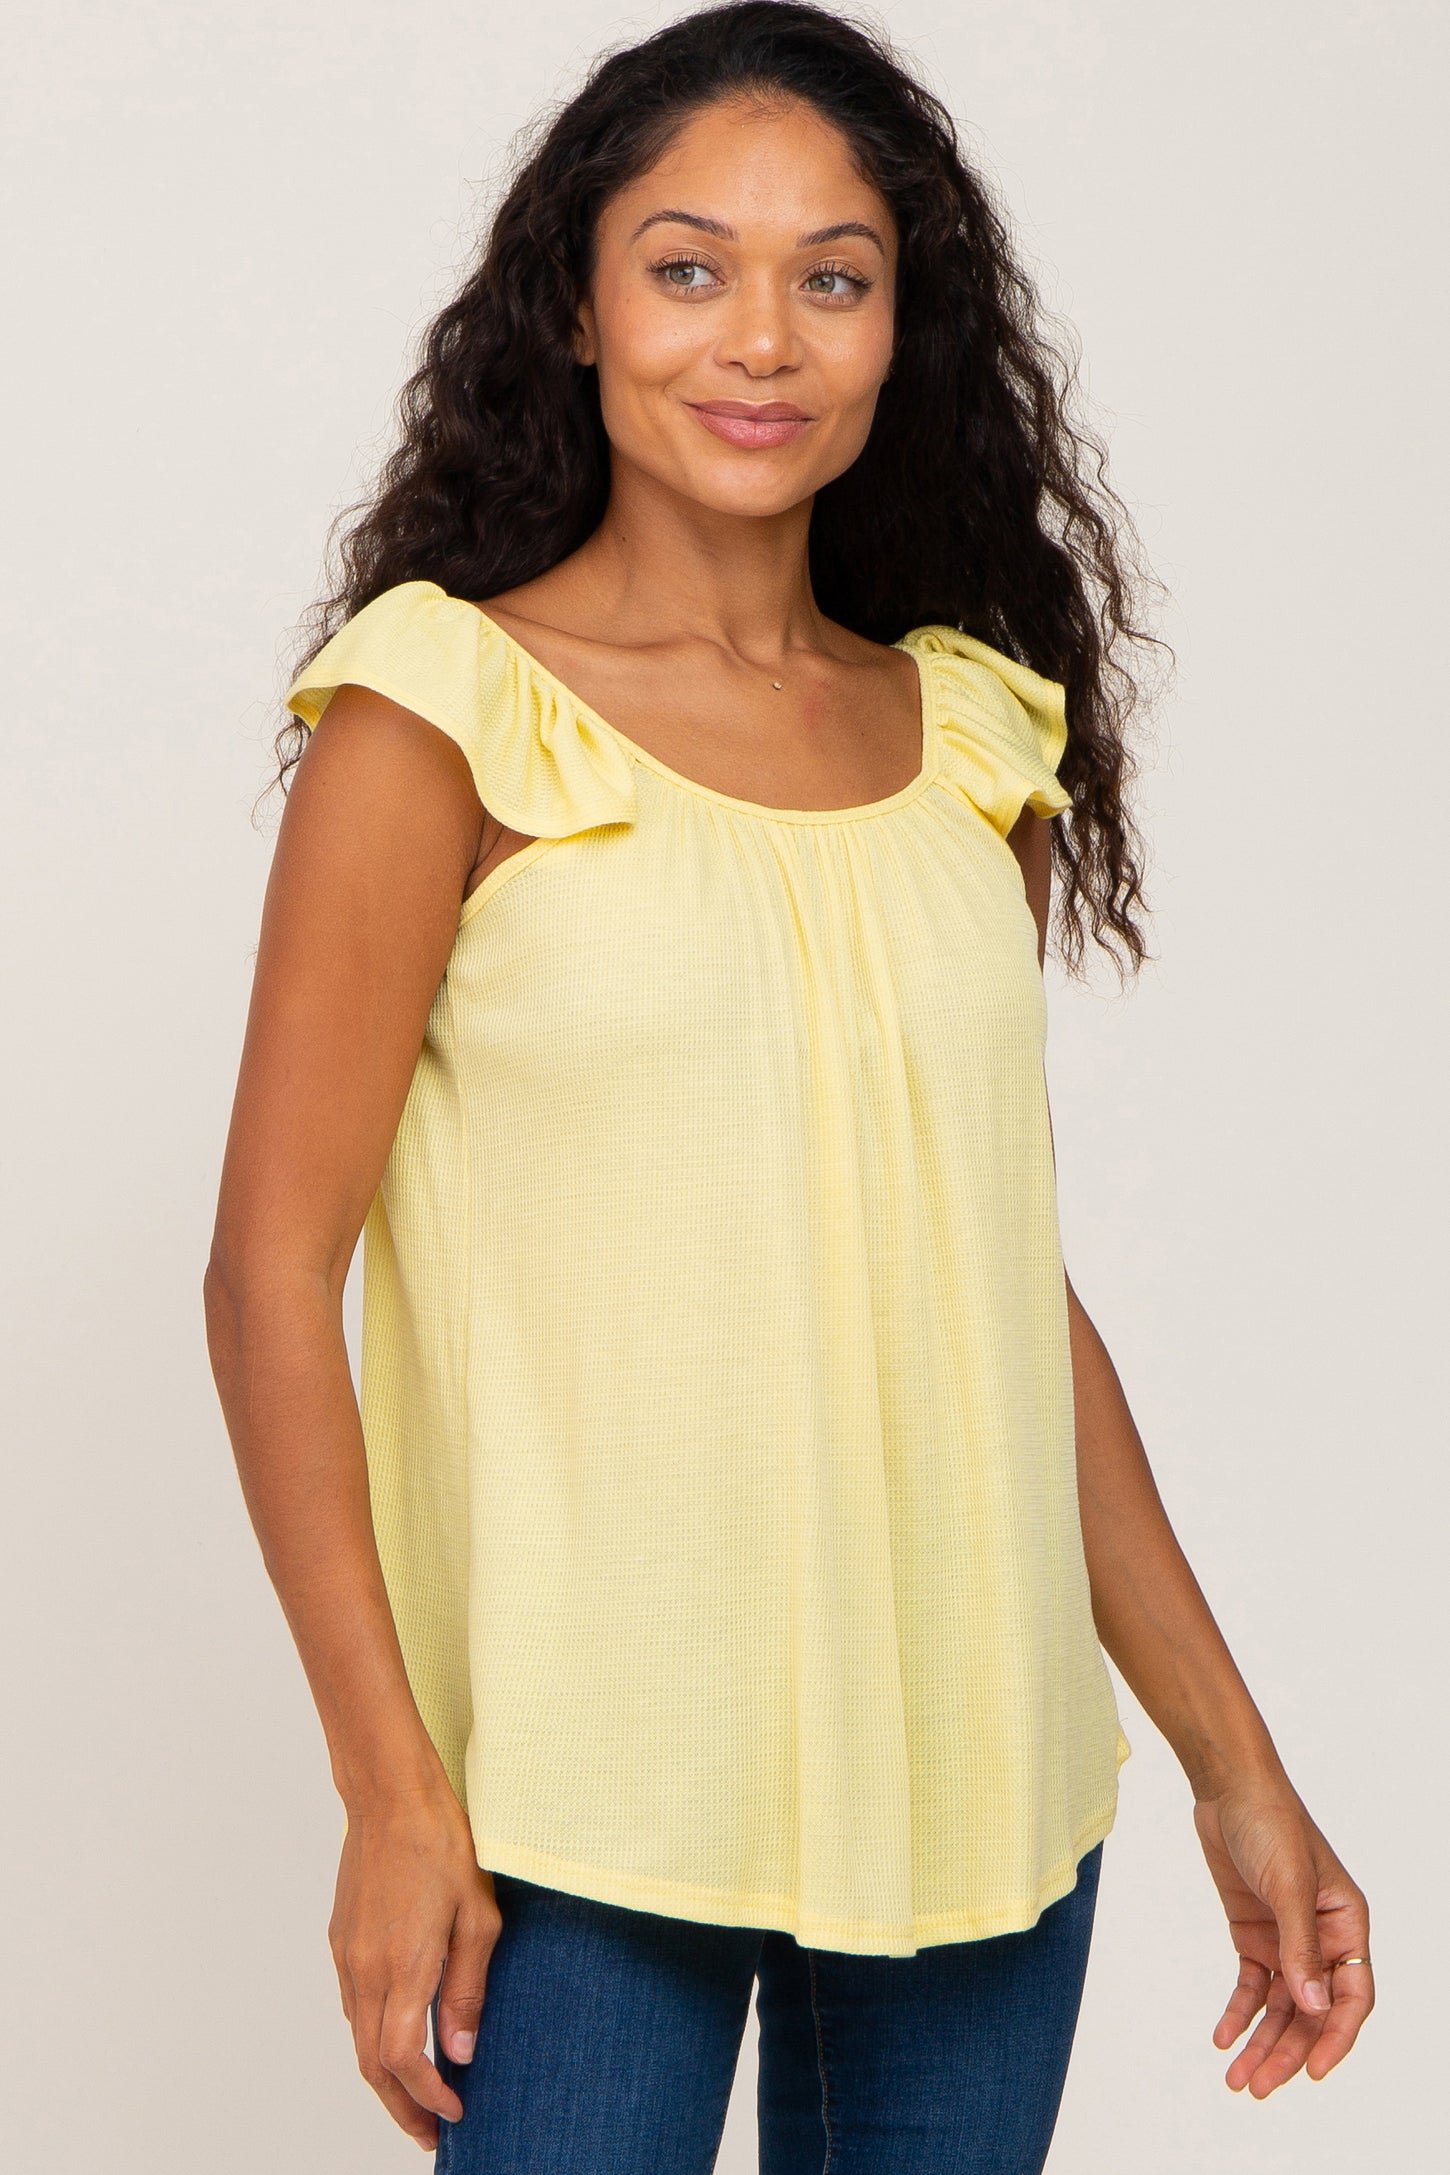 Yellow Flutter Sleeve Maternity Top